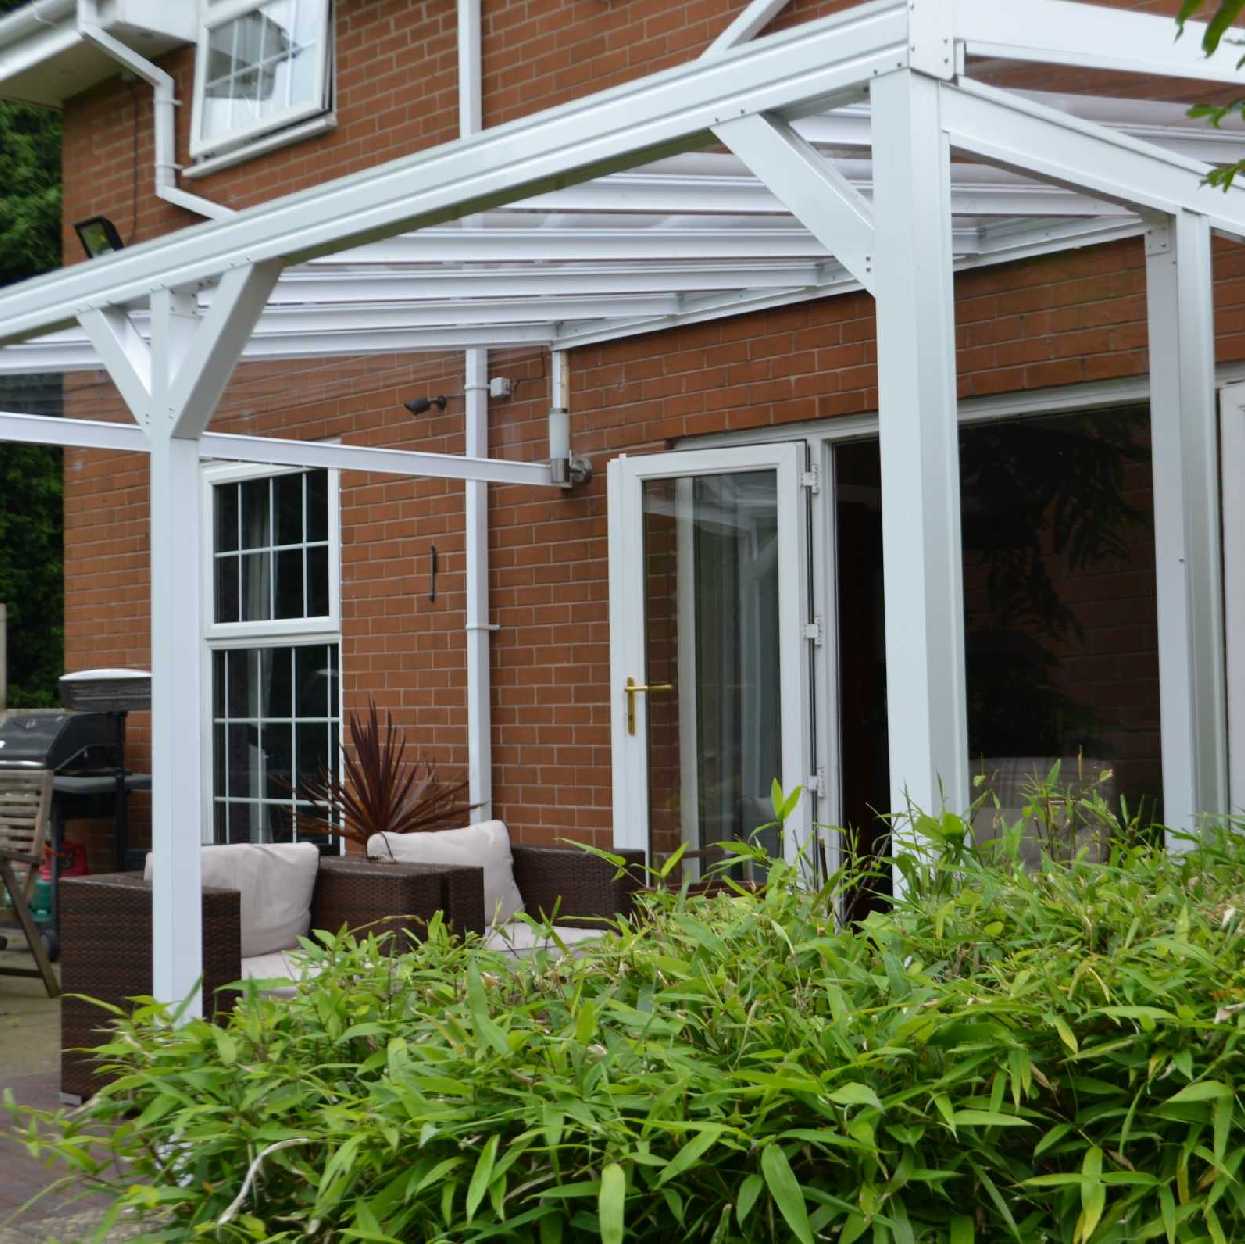 Omega Smart Lean-To Canopy, White with 6mm Glass Clear Plate Polycarbonate Glazing - 3.5m (W) x 3.0m (P), (3) Supporting Posts from Omega Build